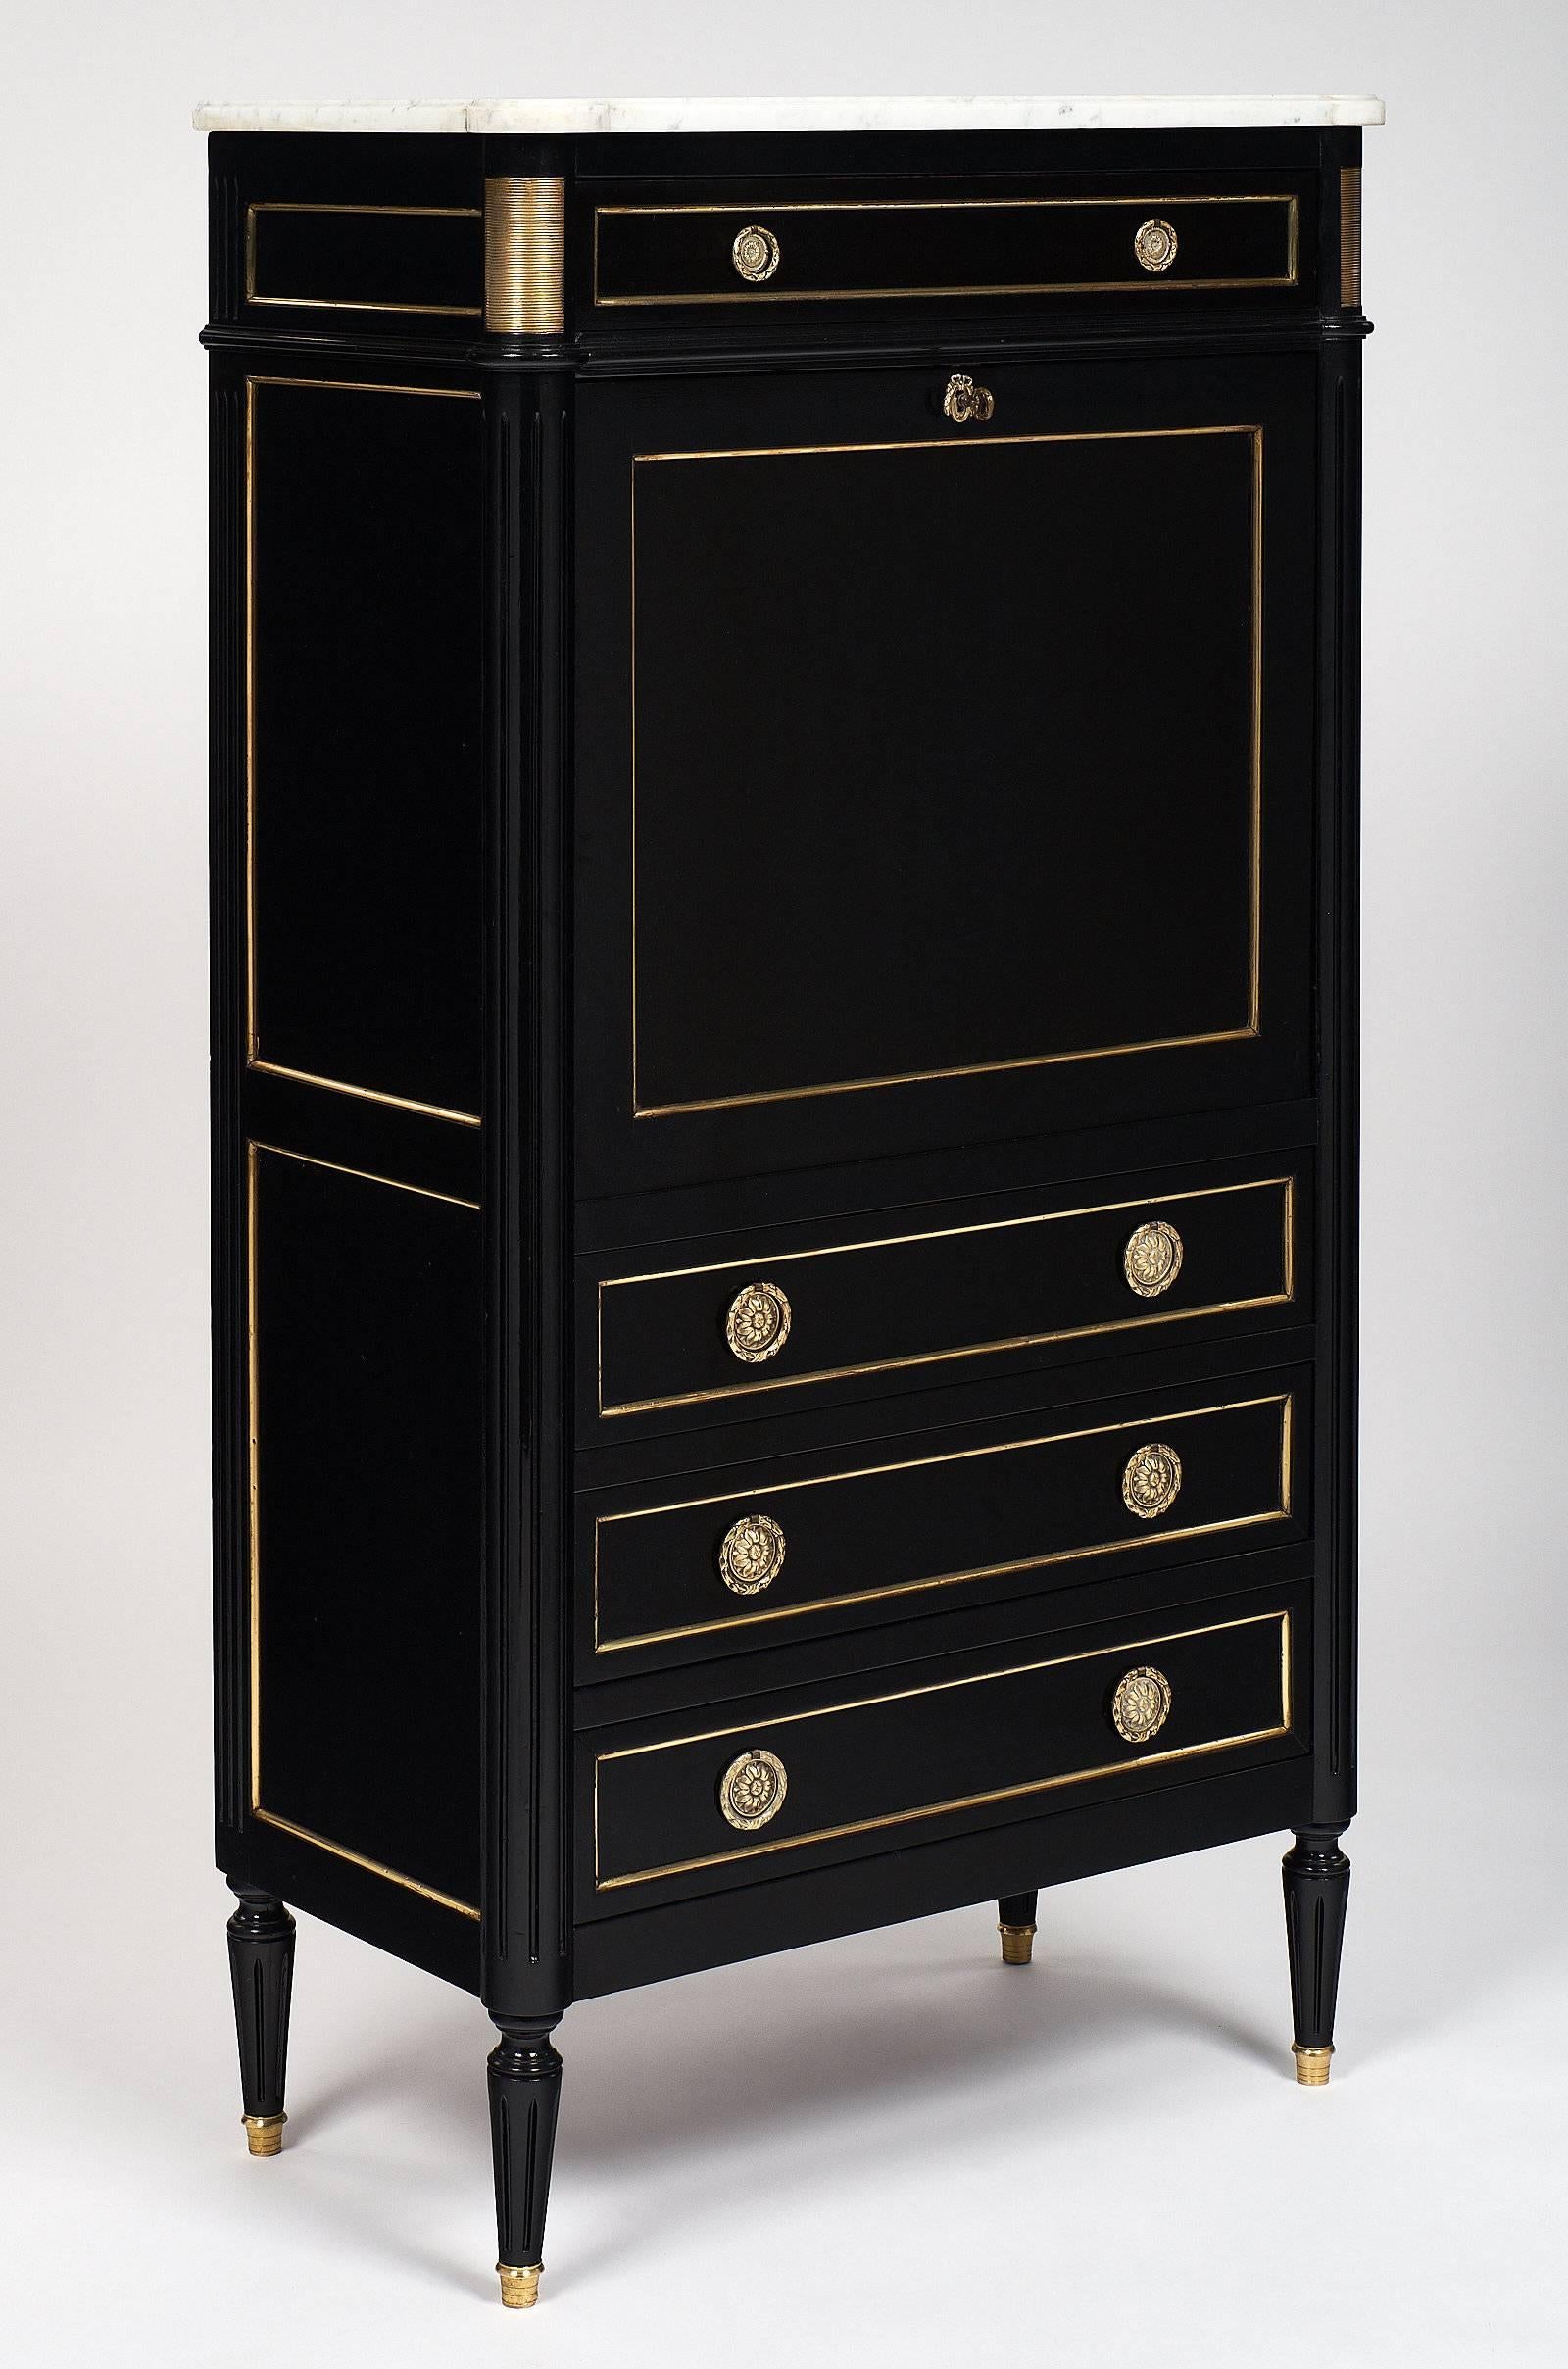 Antique mahogany “Secrétaire” finished with a lustrous ebonized French polish, Carrara marble top, and gilded trims throughout. This Louis XVI Style French antique secretary desk has three dovetailed drawers with their finely cast hardware, and a